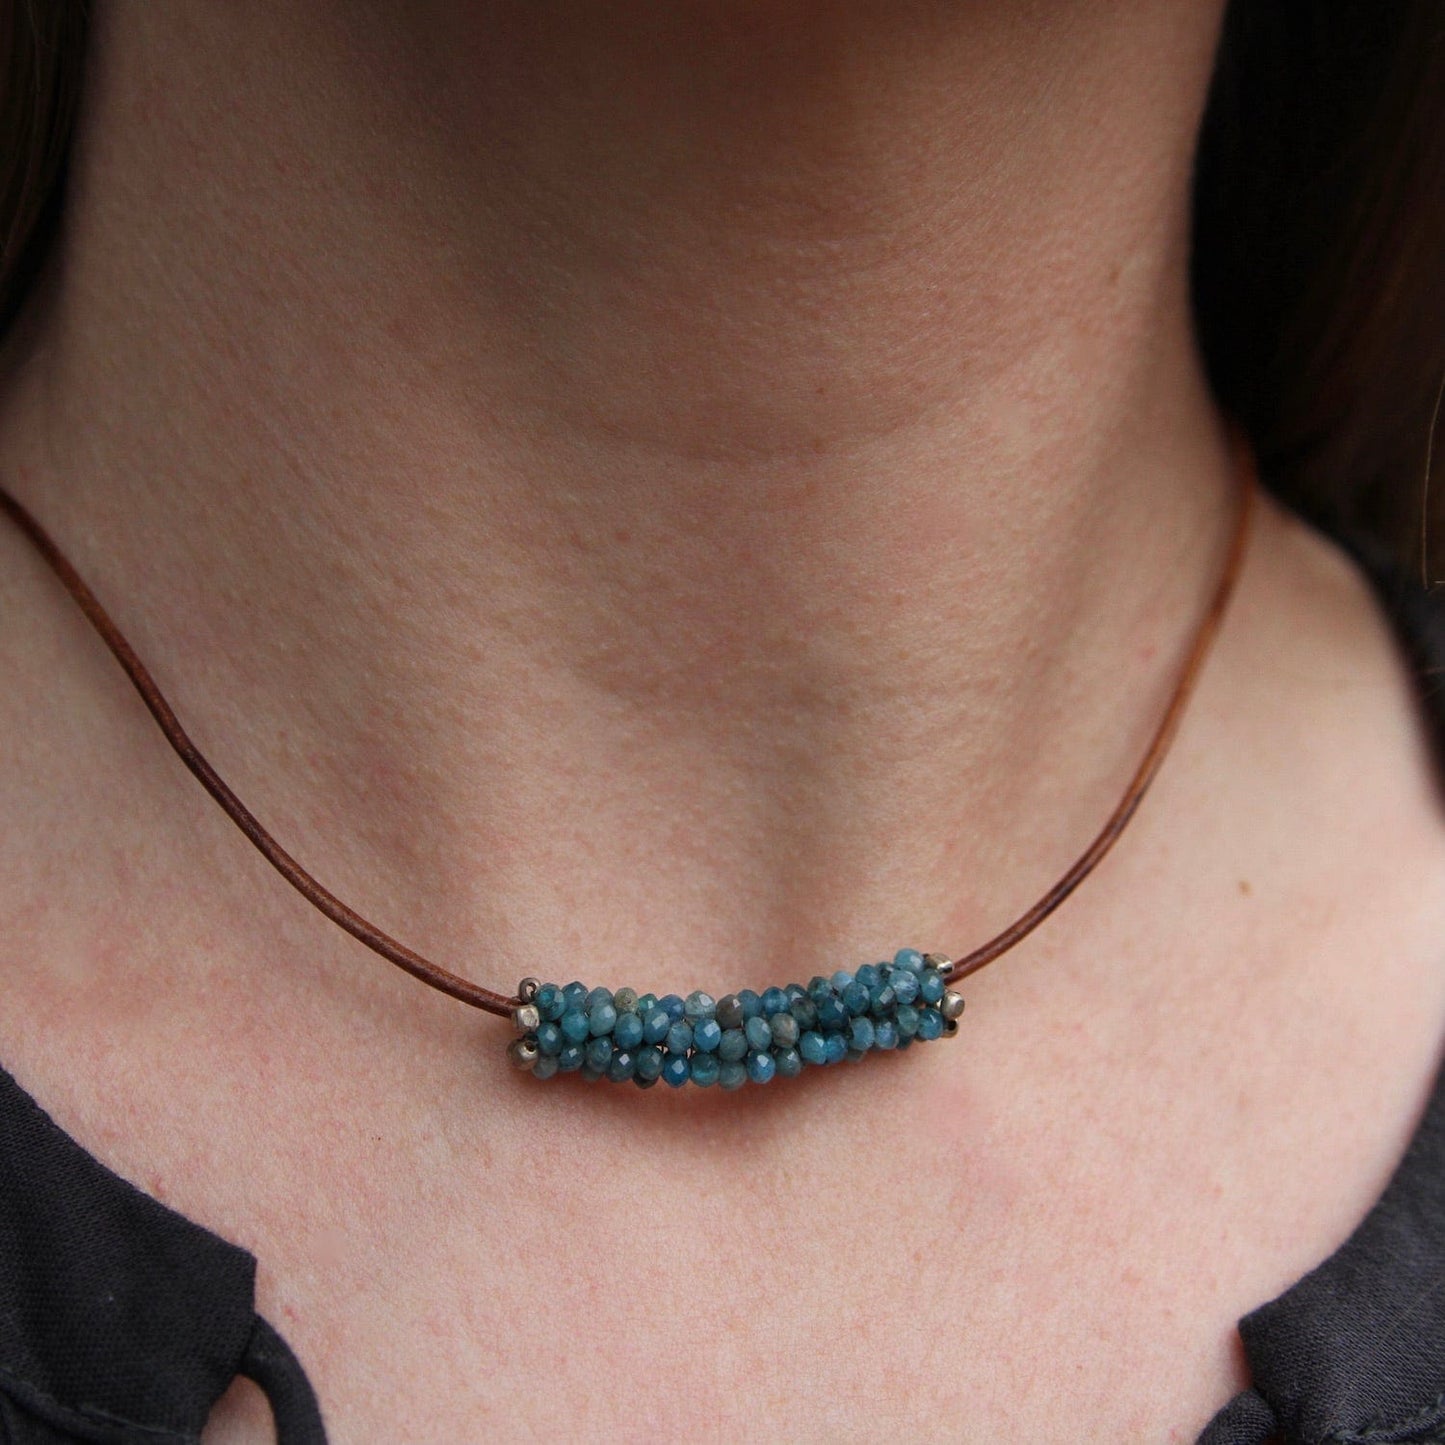 NKL-JM Hand Stitched Apatite Leather Necklace